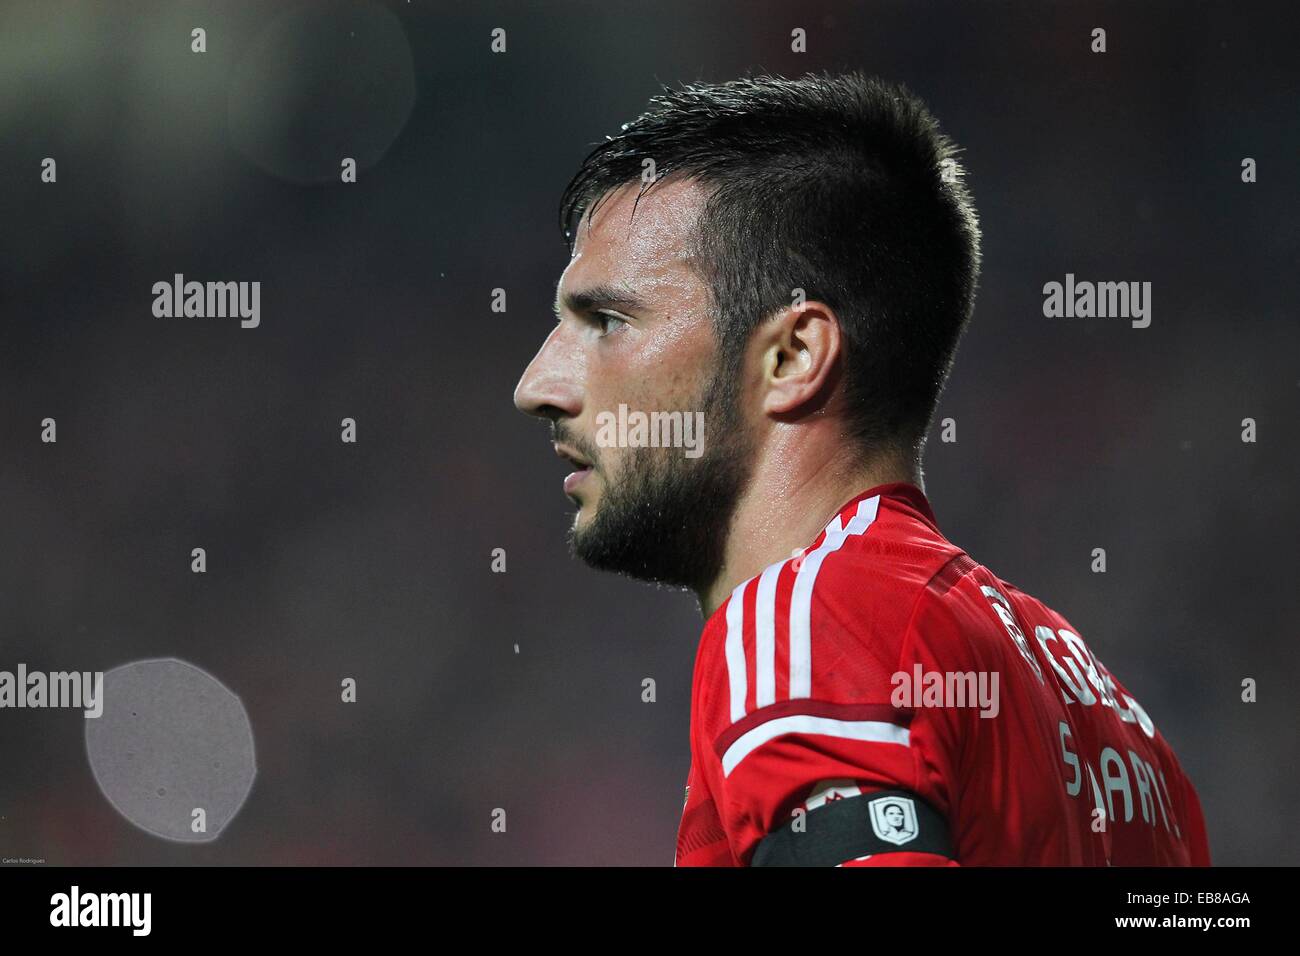 Andreas Samaris - 22.11.2014 - Benfica/Moreirense - Coupe du Portugal- Photo : Carlos Rodrigues/Icon Sport Stock Photo